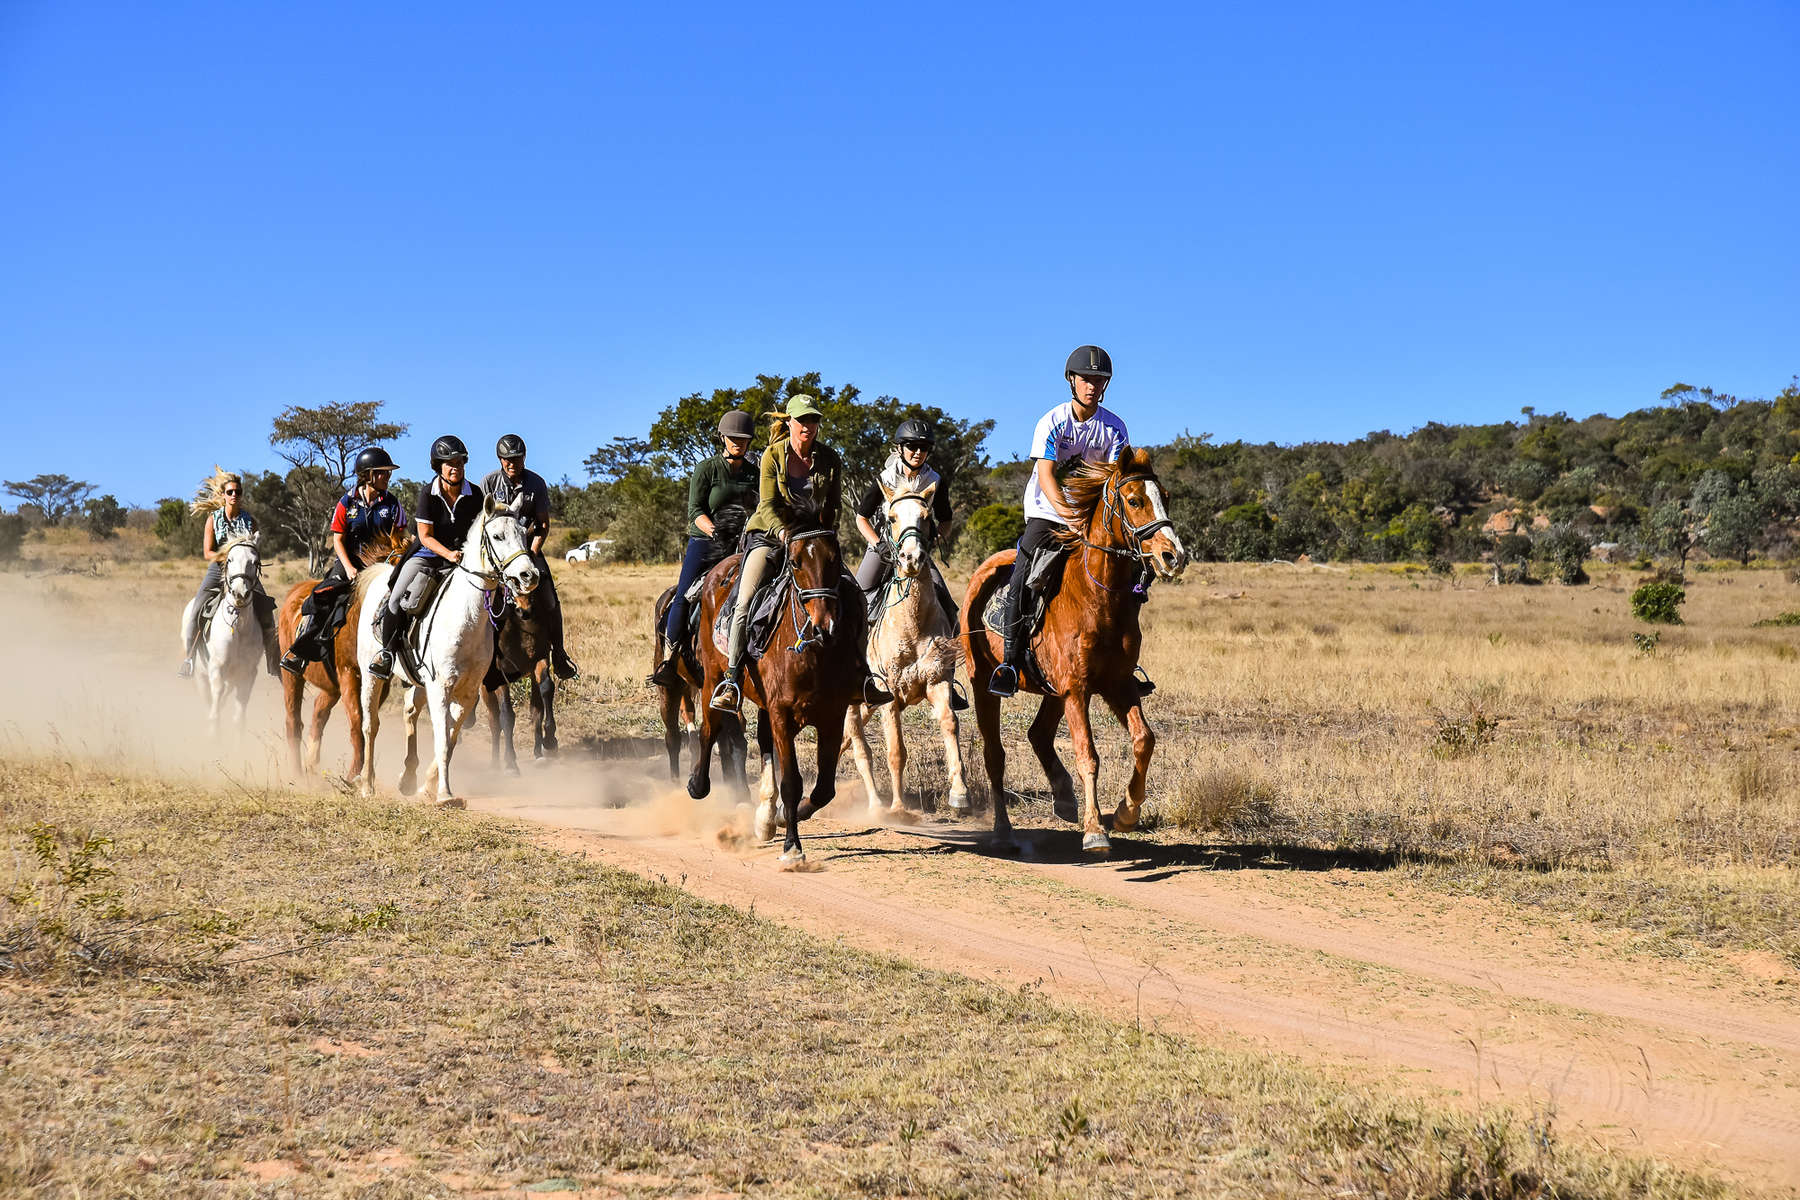 Group of riders on a riding safari in Africa